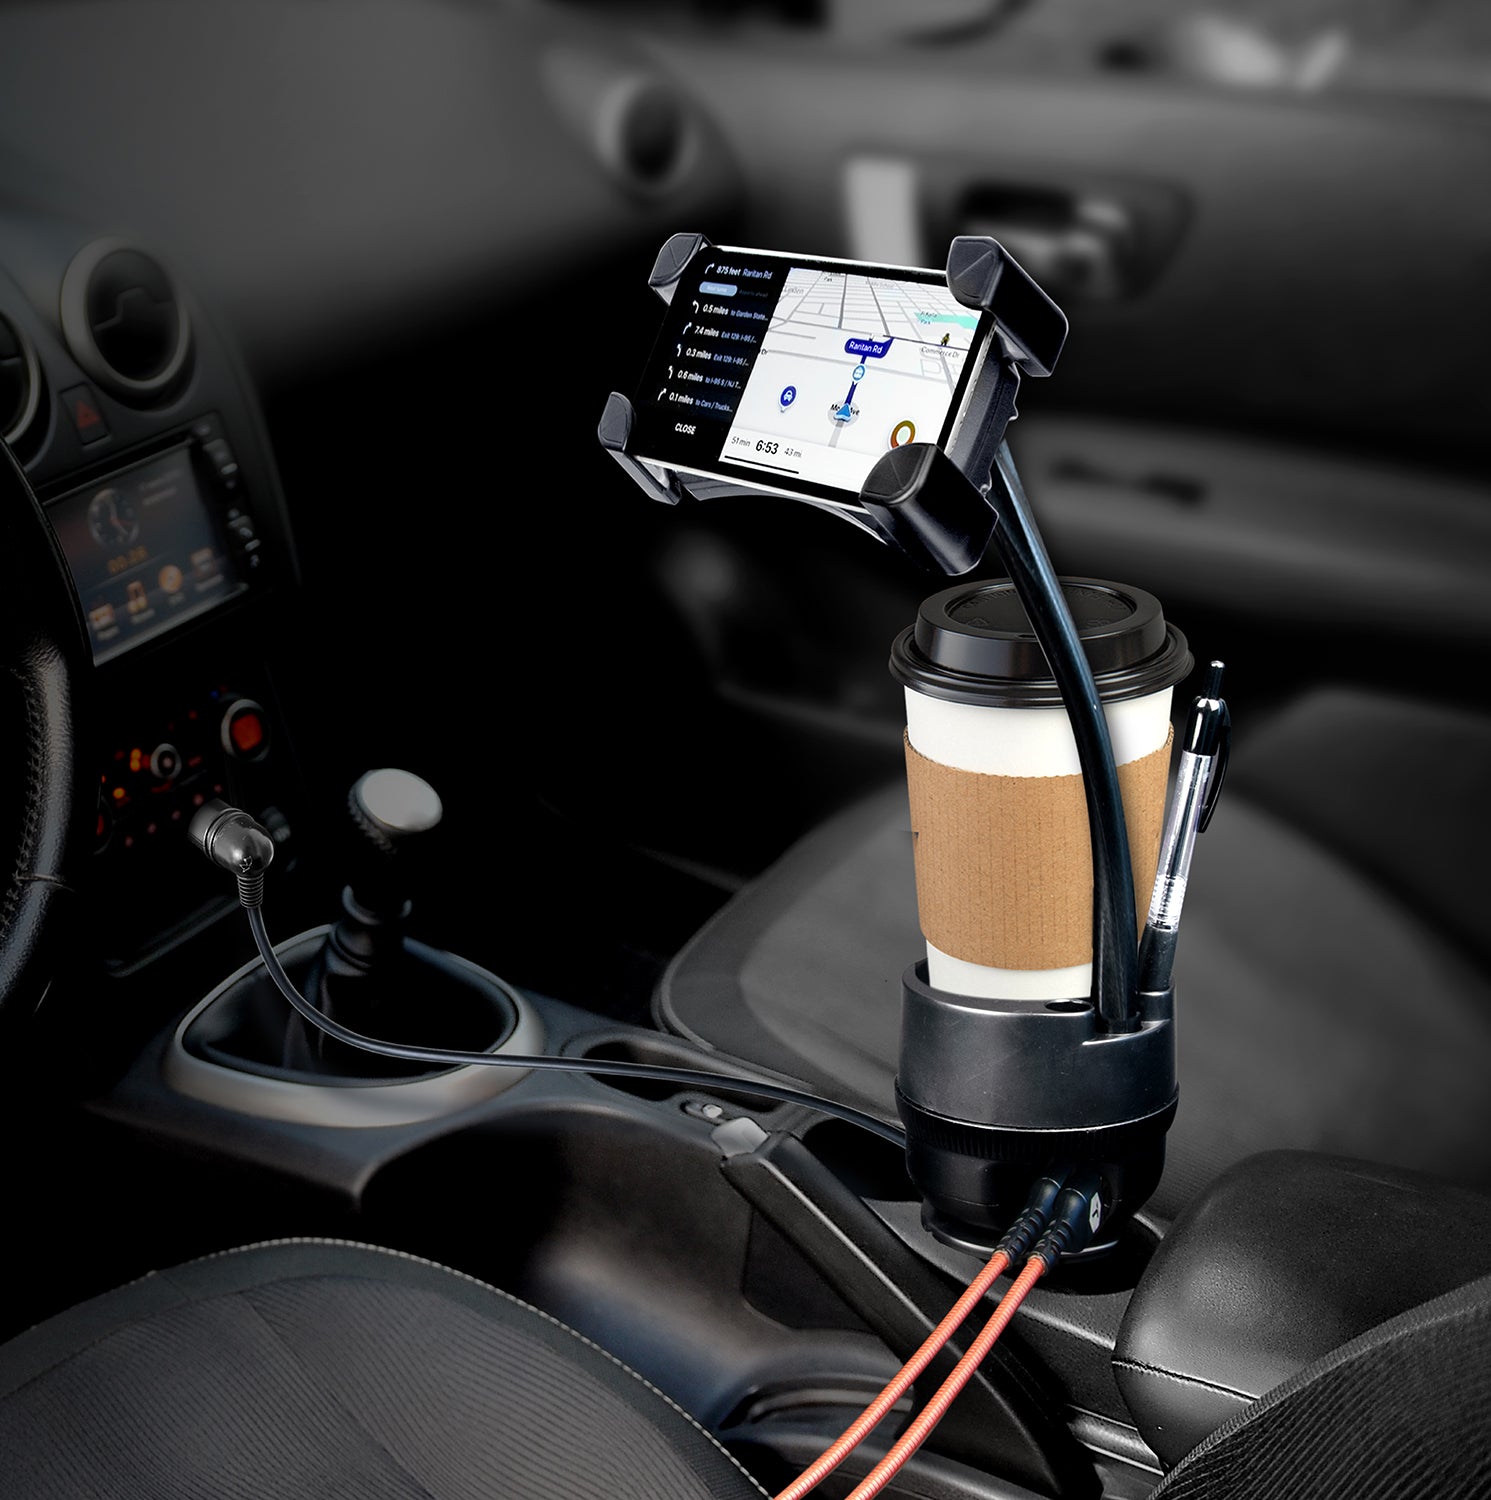 COMMUTER "POWER CUP" CUP HOLDER MOUNT